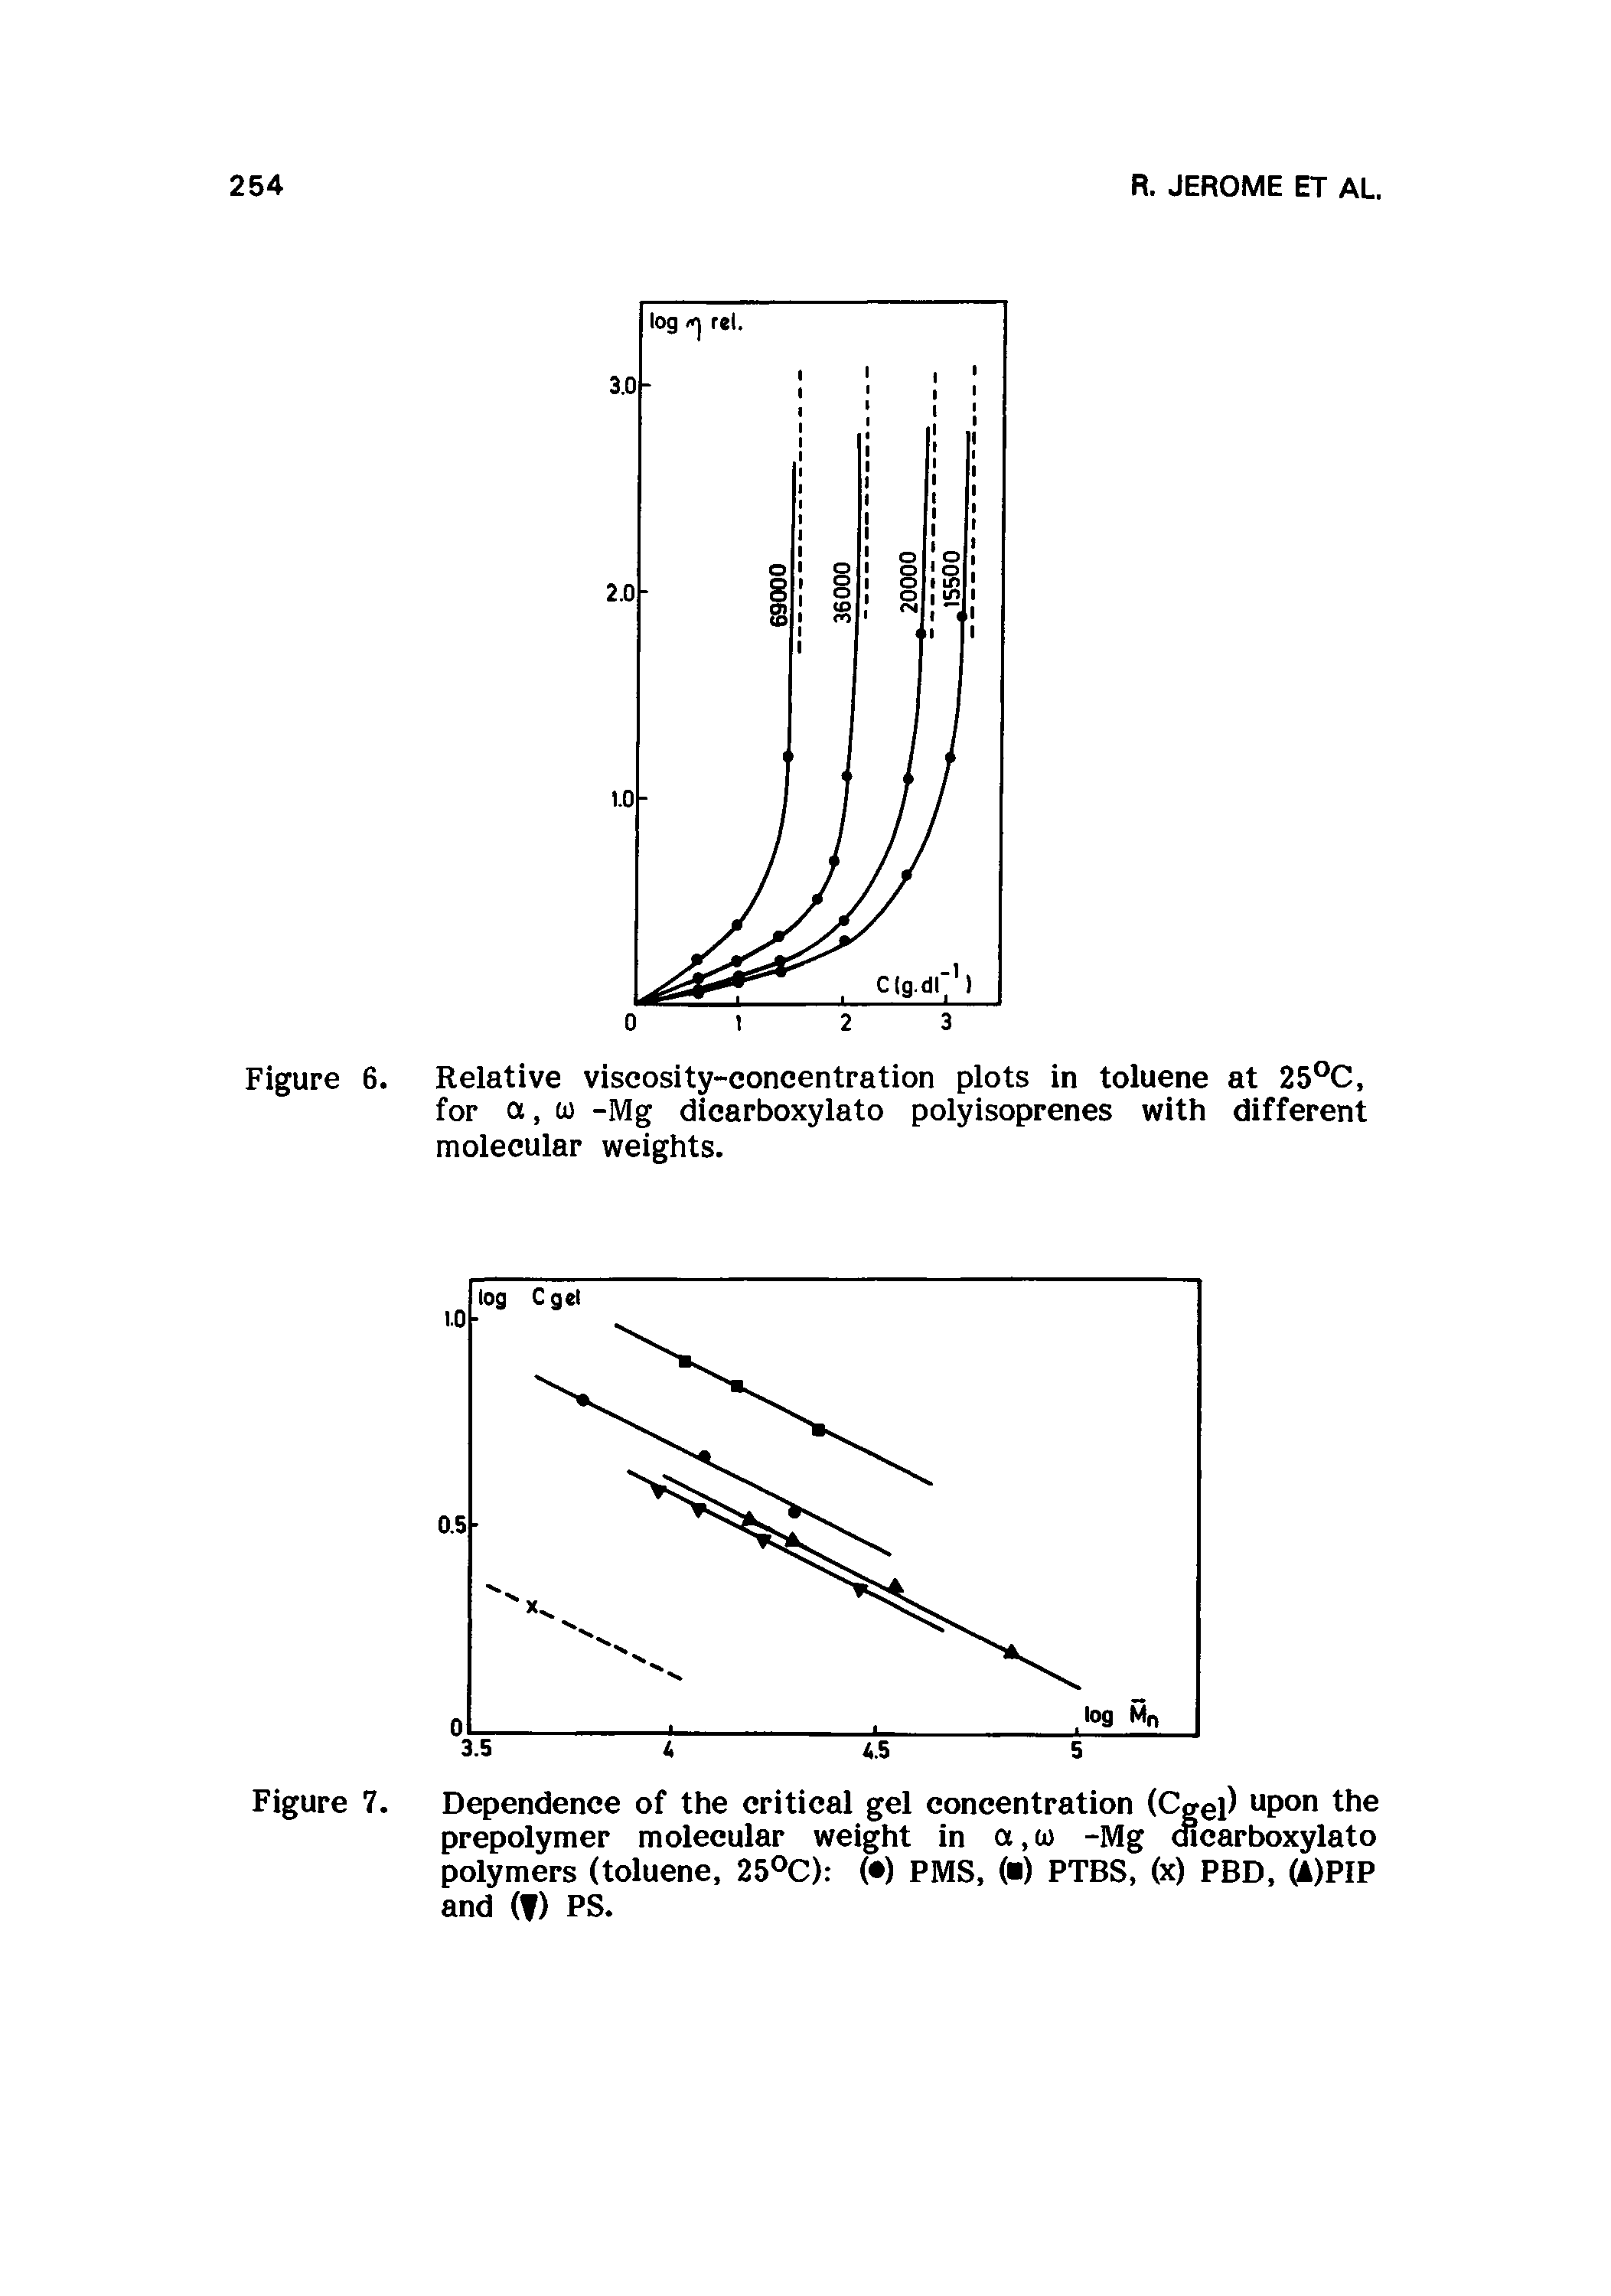 Figure 7. Dependence of the critical gel concentration (Cgep upon the prepolymer molecular weight in a,to -Mg dicarboxylato polymers (toluene, 25 0 ( ) PMS, ( ) PTBS, (x) PBD, (A)PIP and ( ) PS.